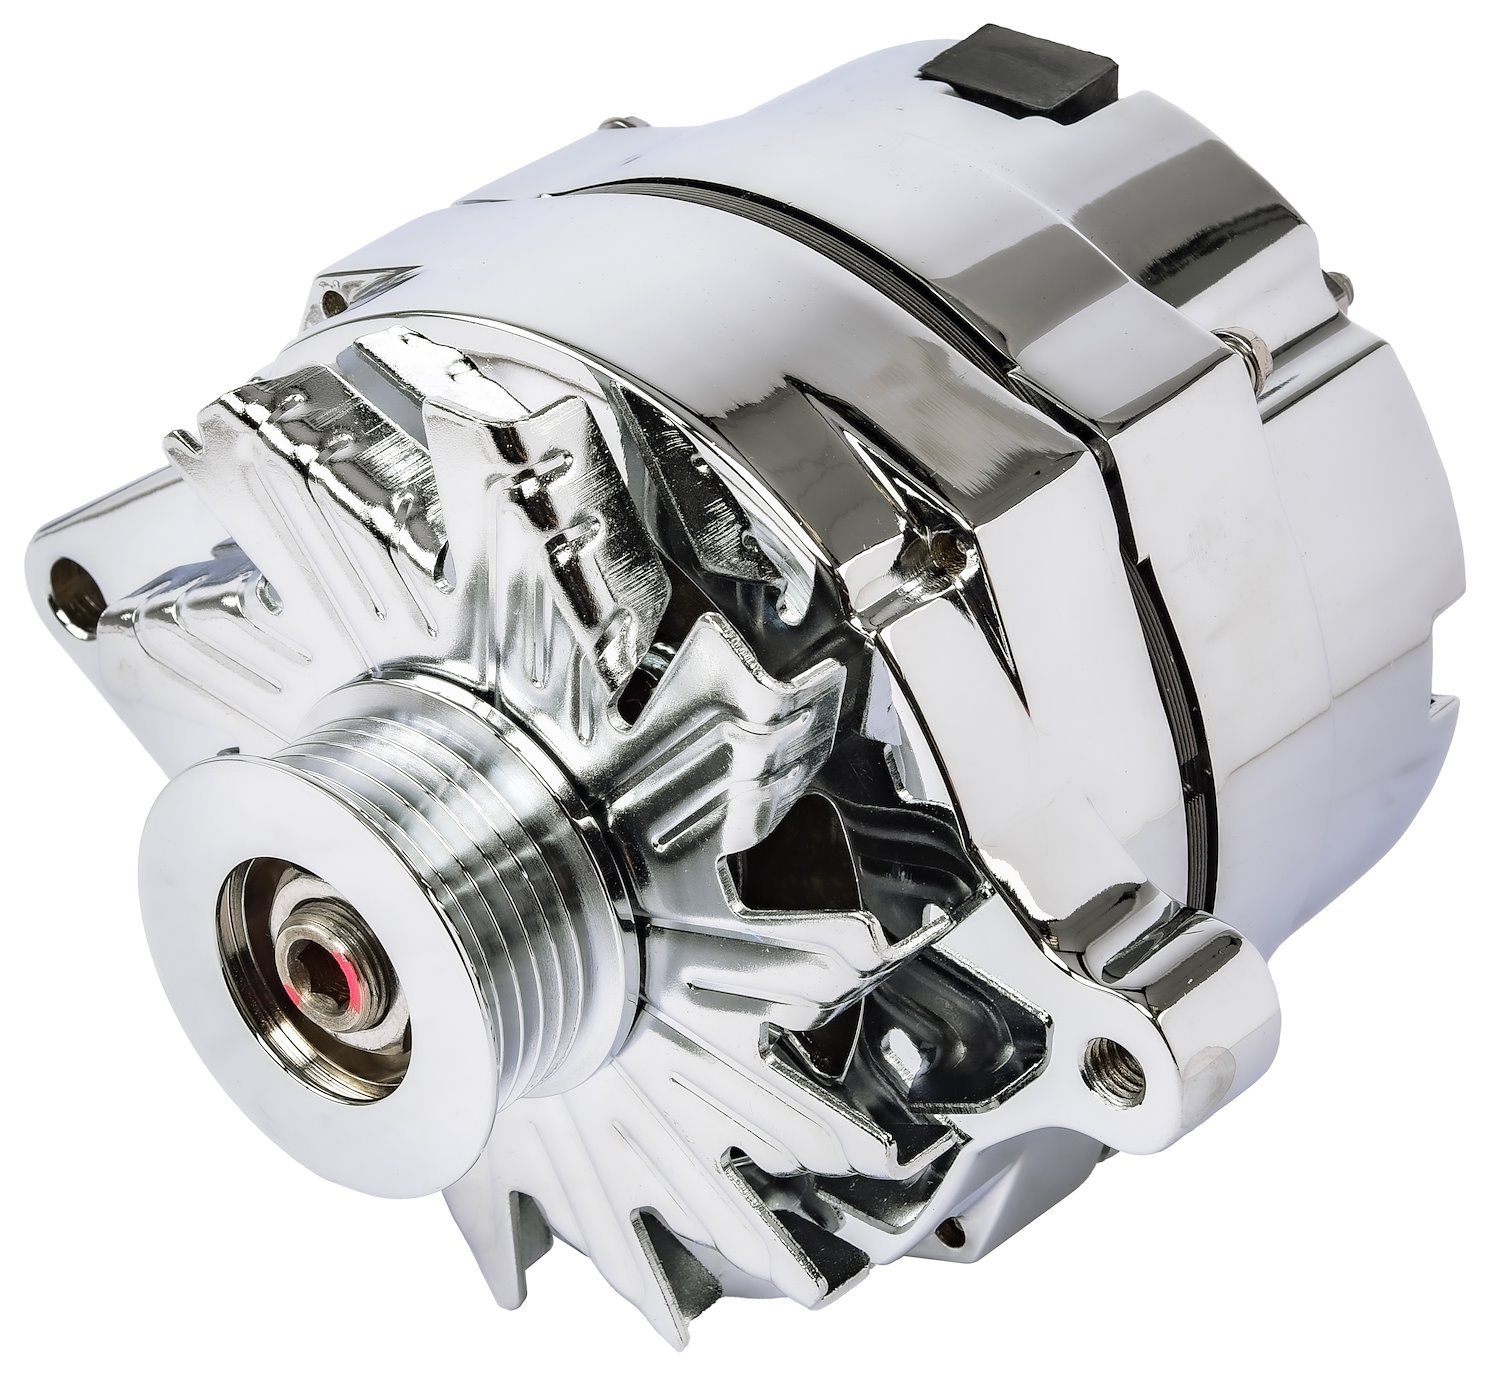 1-Wire Ford Alternator 140 Amp Output with Serpentine Belt Pulley [Chrome Plated Finish]